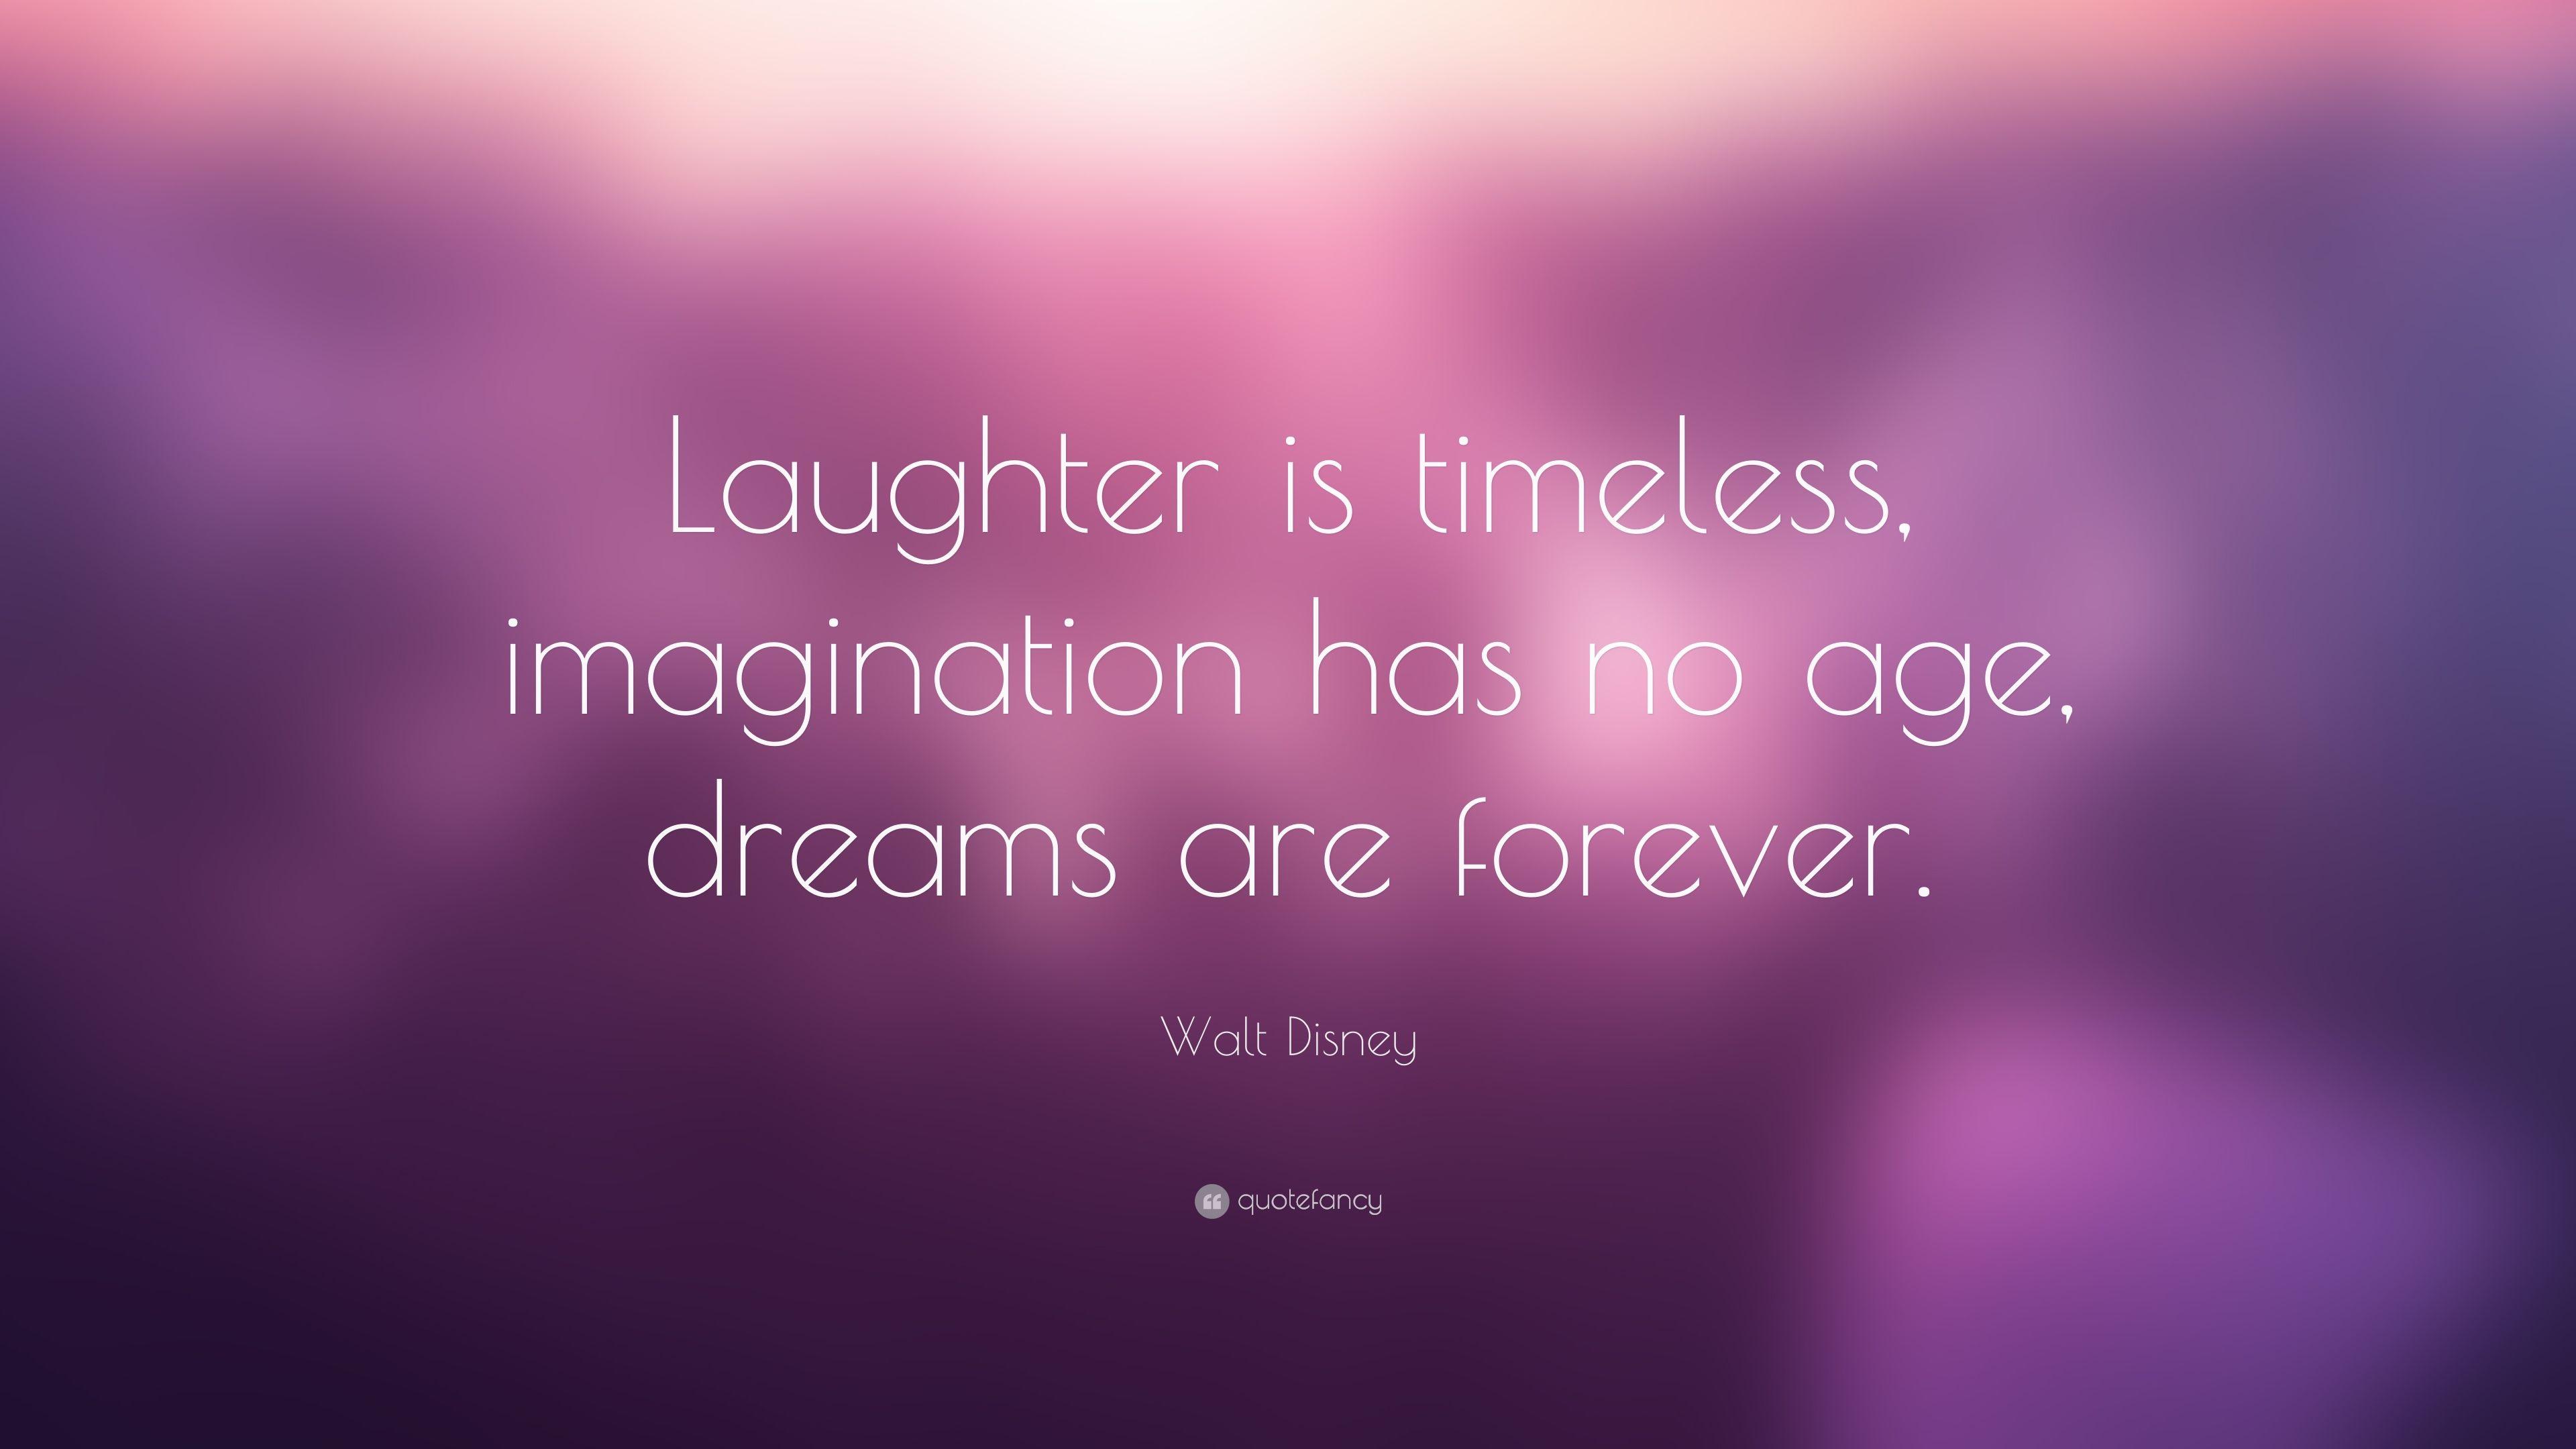 Walt Disney Quote: “Laughter is timeless, imagination has no age